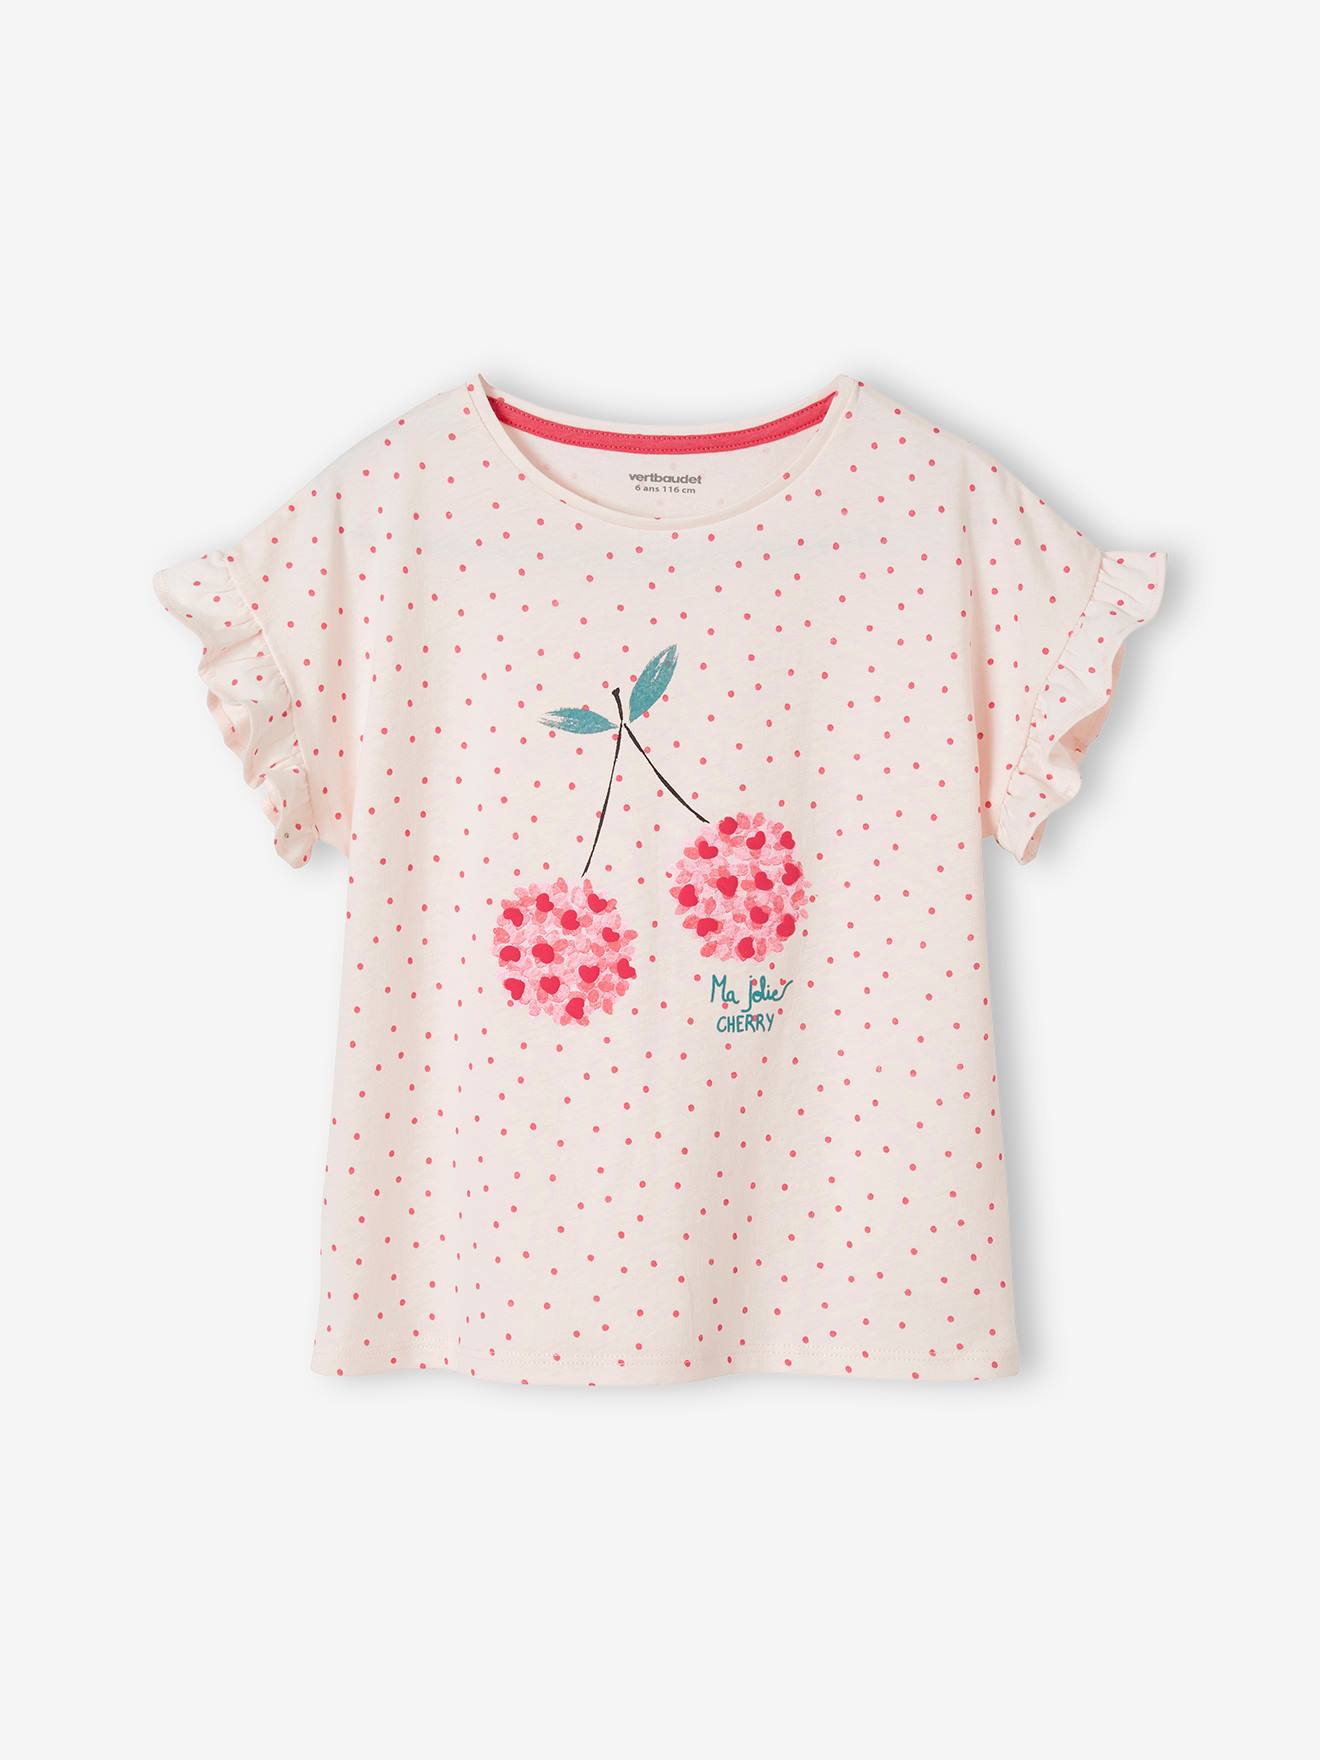 T-Shirt with Fruit & Print in Relief, for Girls - medium all over printed, Girls